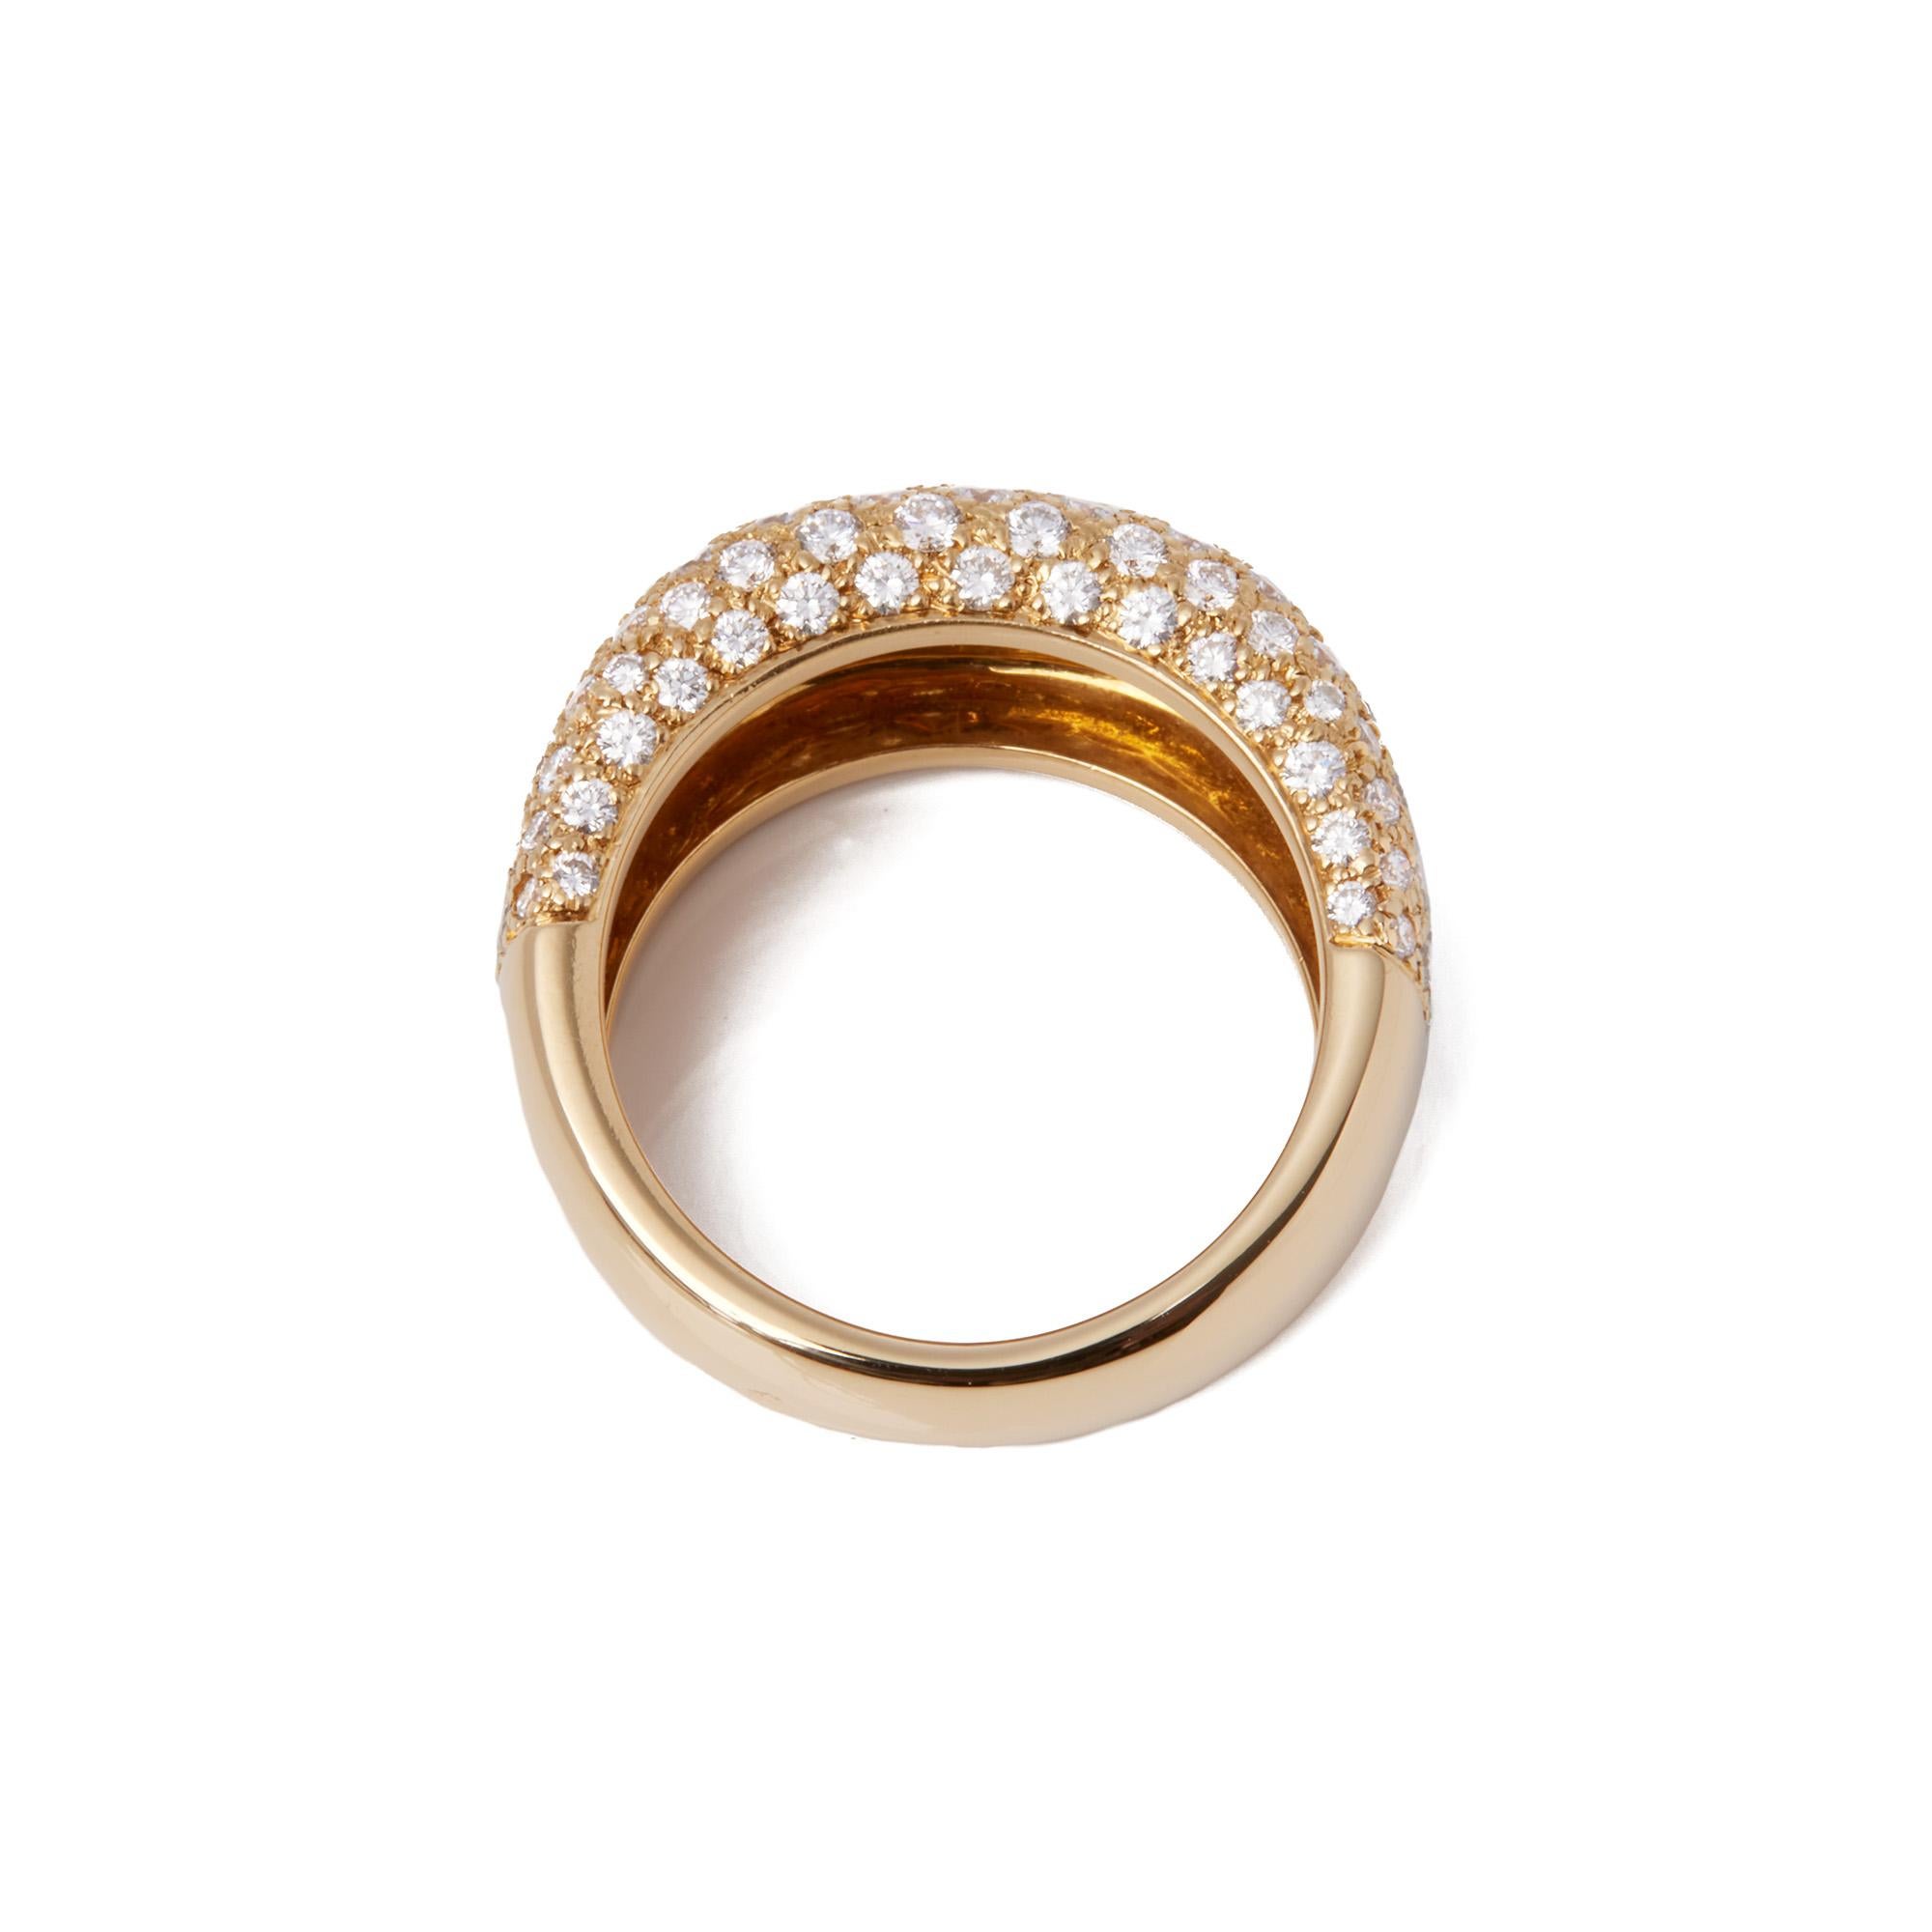 Cartier Pave Diamond 18ct Yellow Gold Bombe Style Ring In Excellent Condition For Sale In Bishop's Stortford, Hertfordshire